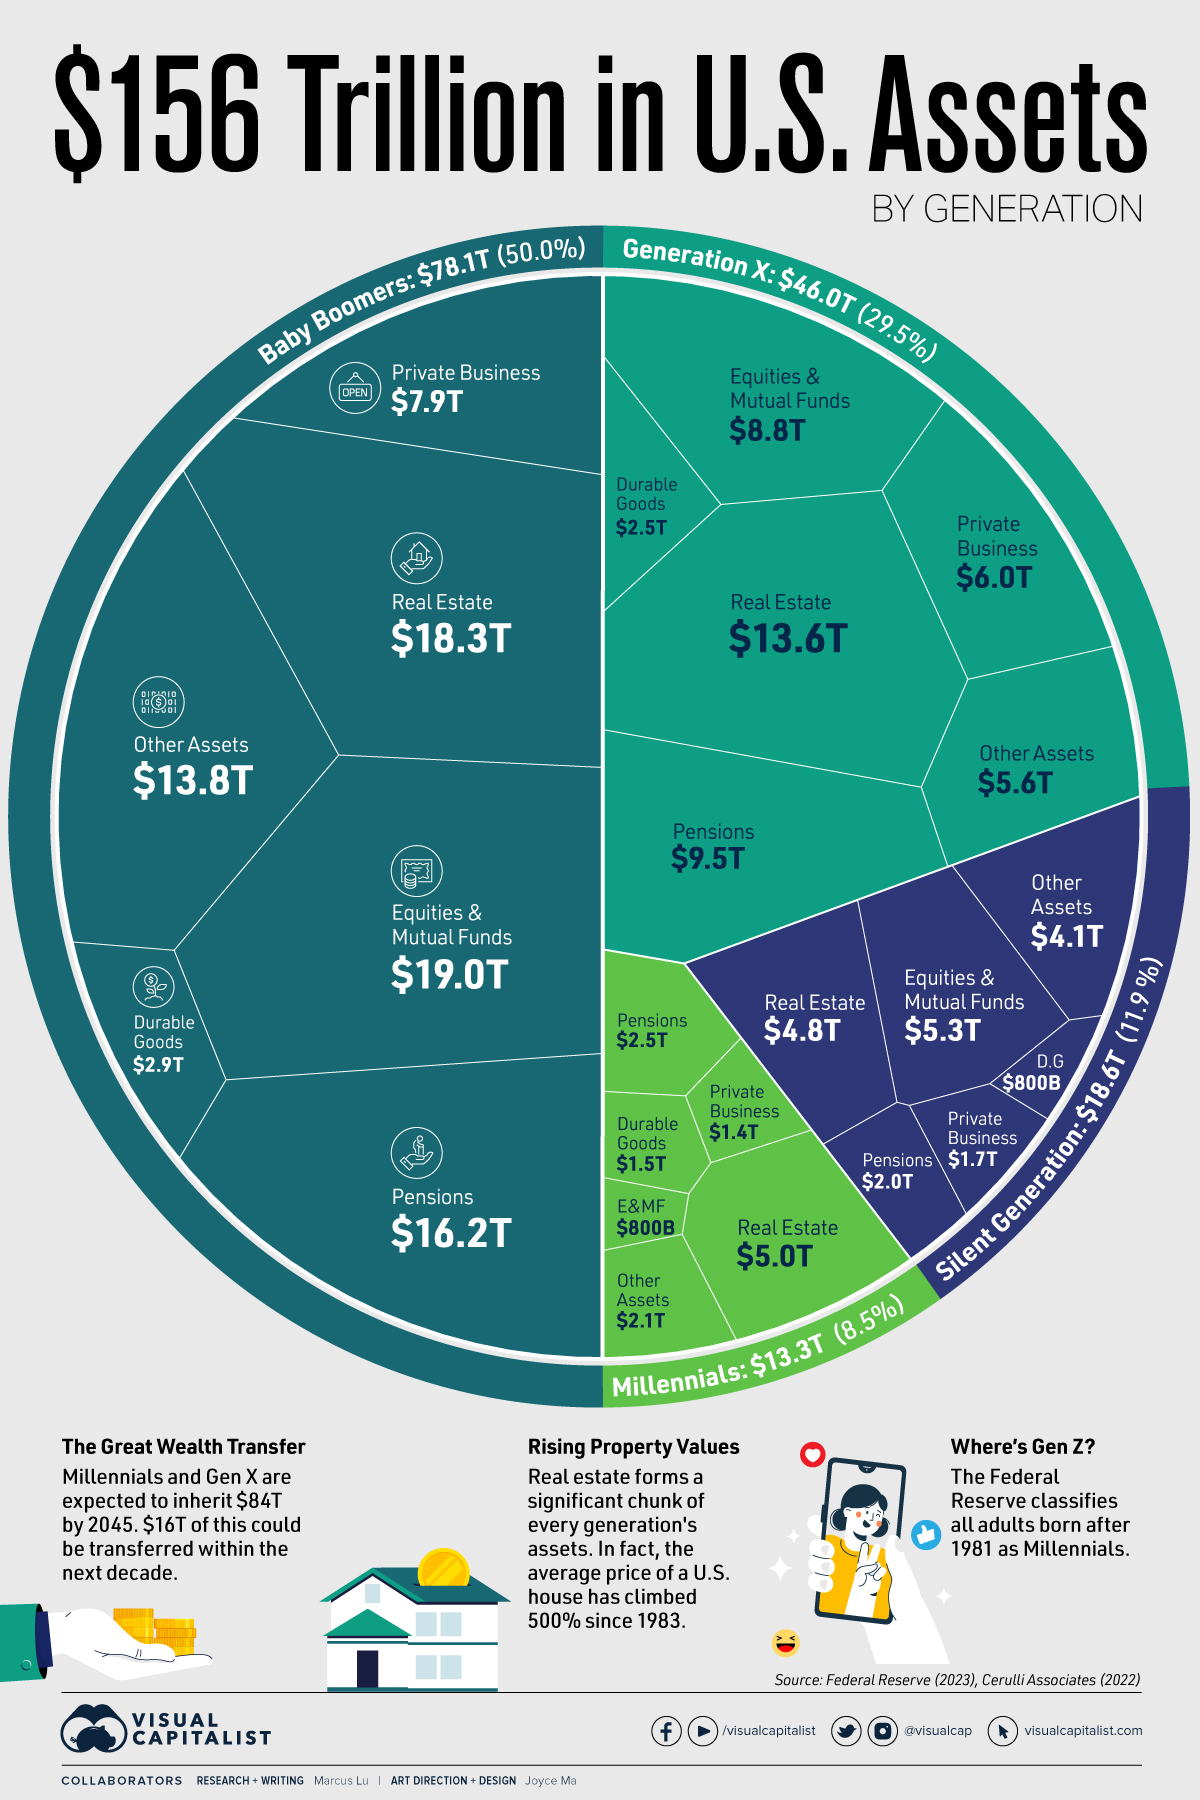 Visualizing U.S. Wealth by Generation - Assets